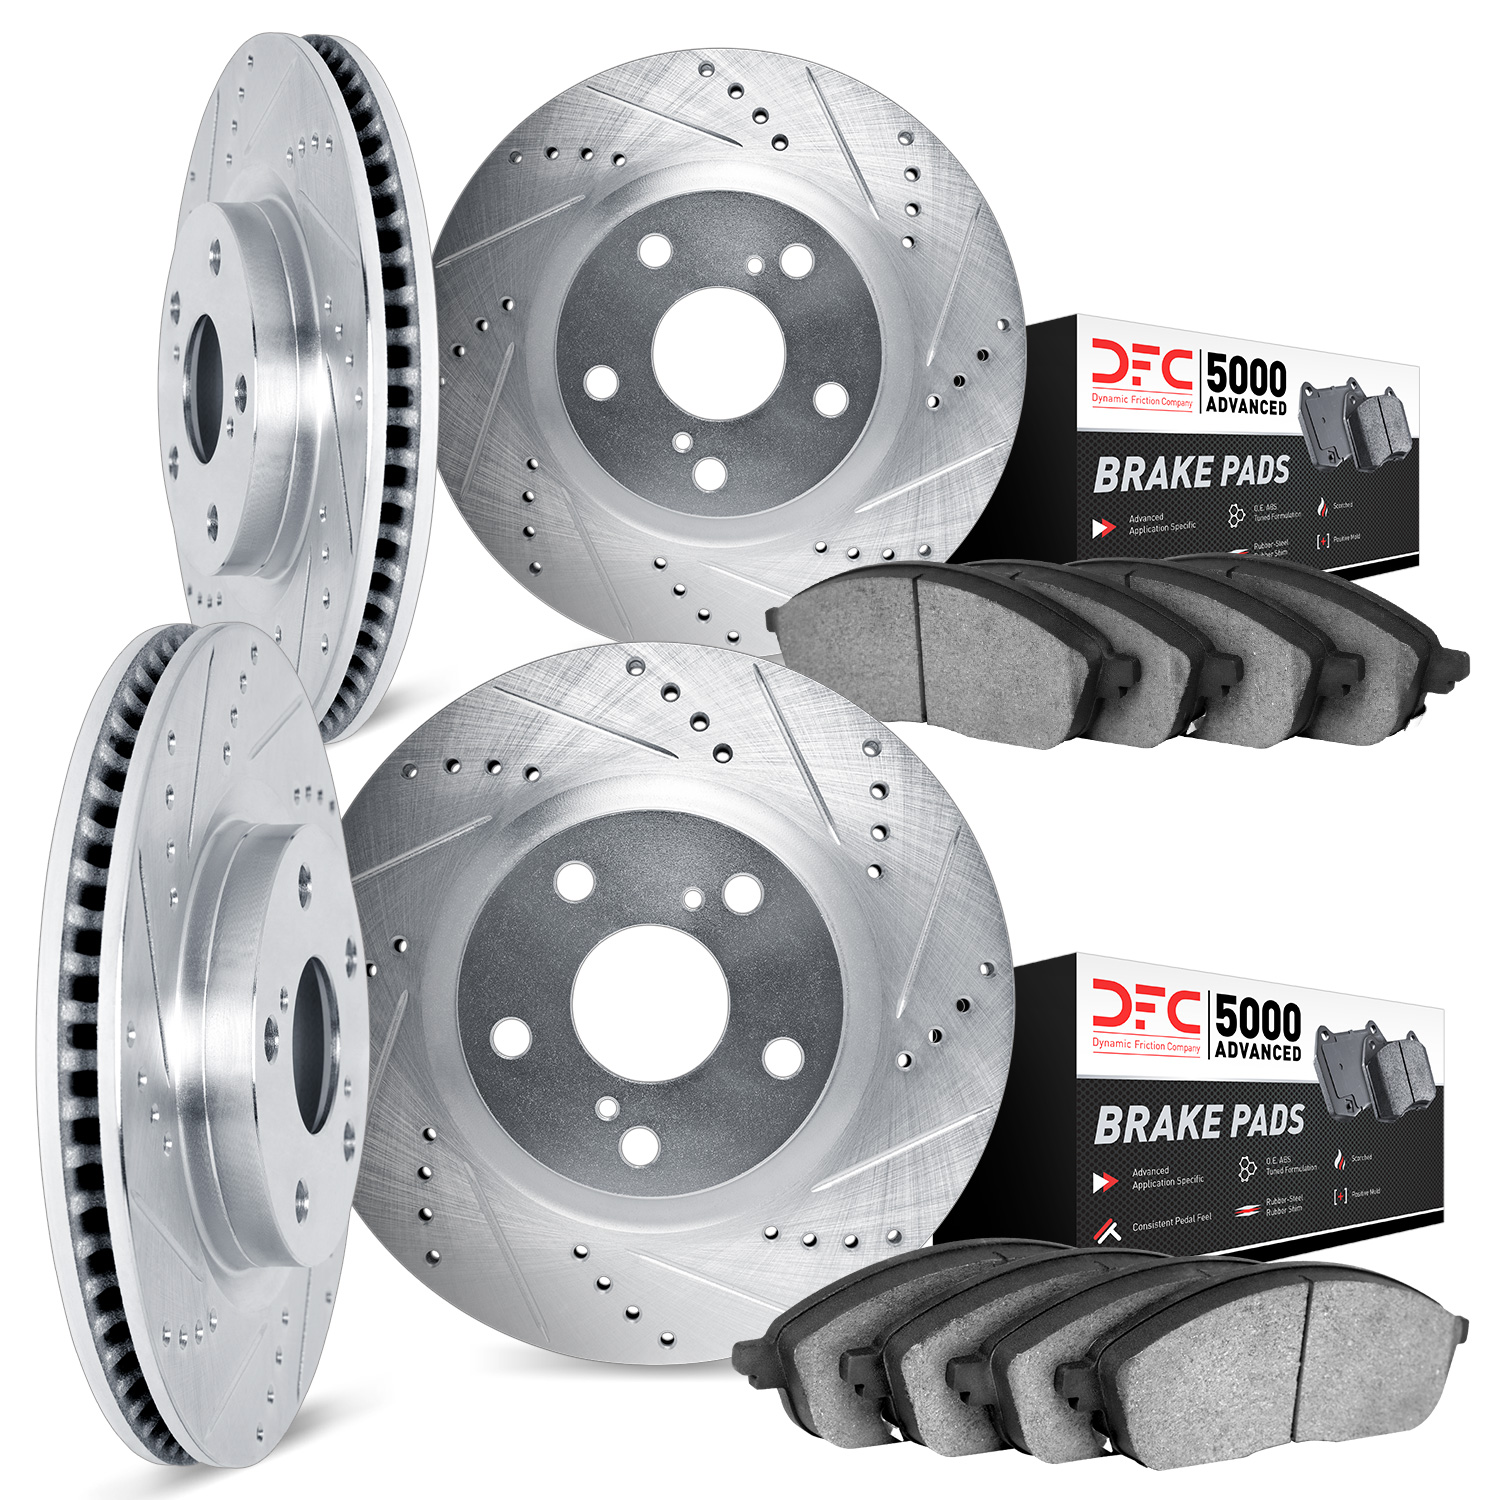 7504-31016 Drilled/Slotted Brake Rotors w/5000 Advanced Brake Pads Kit [Silver], 2008-2010 BMW, Position: Front and Rear